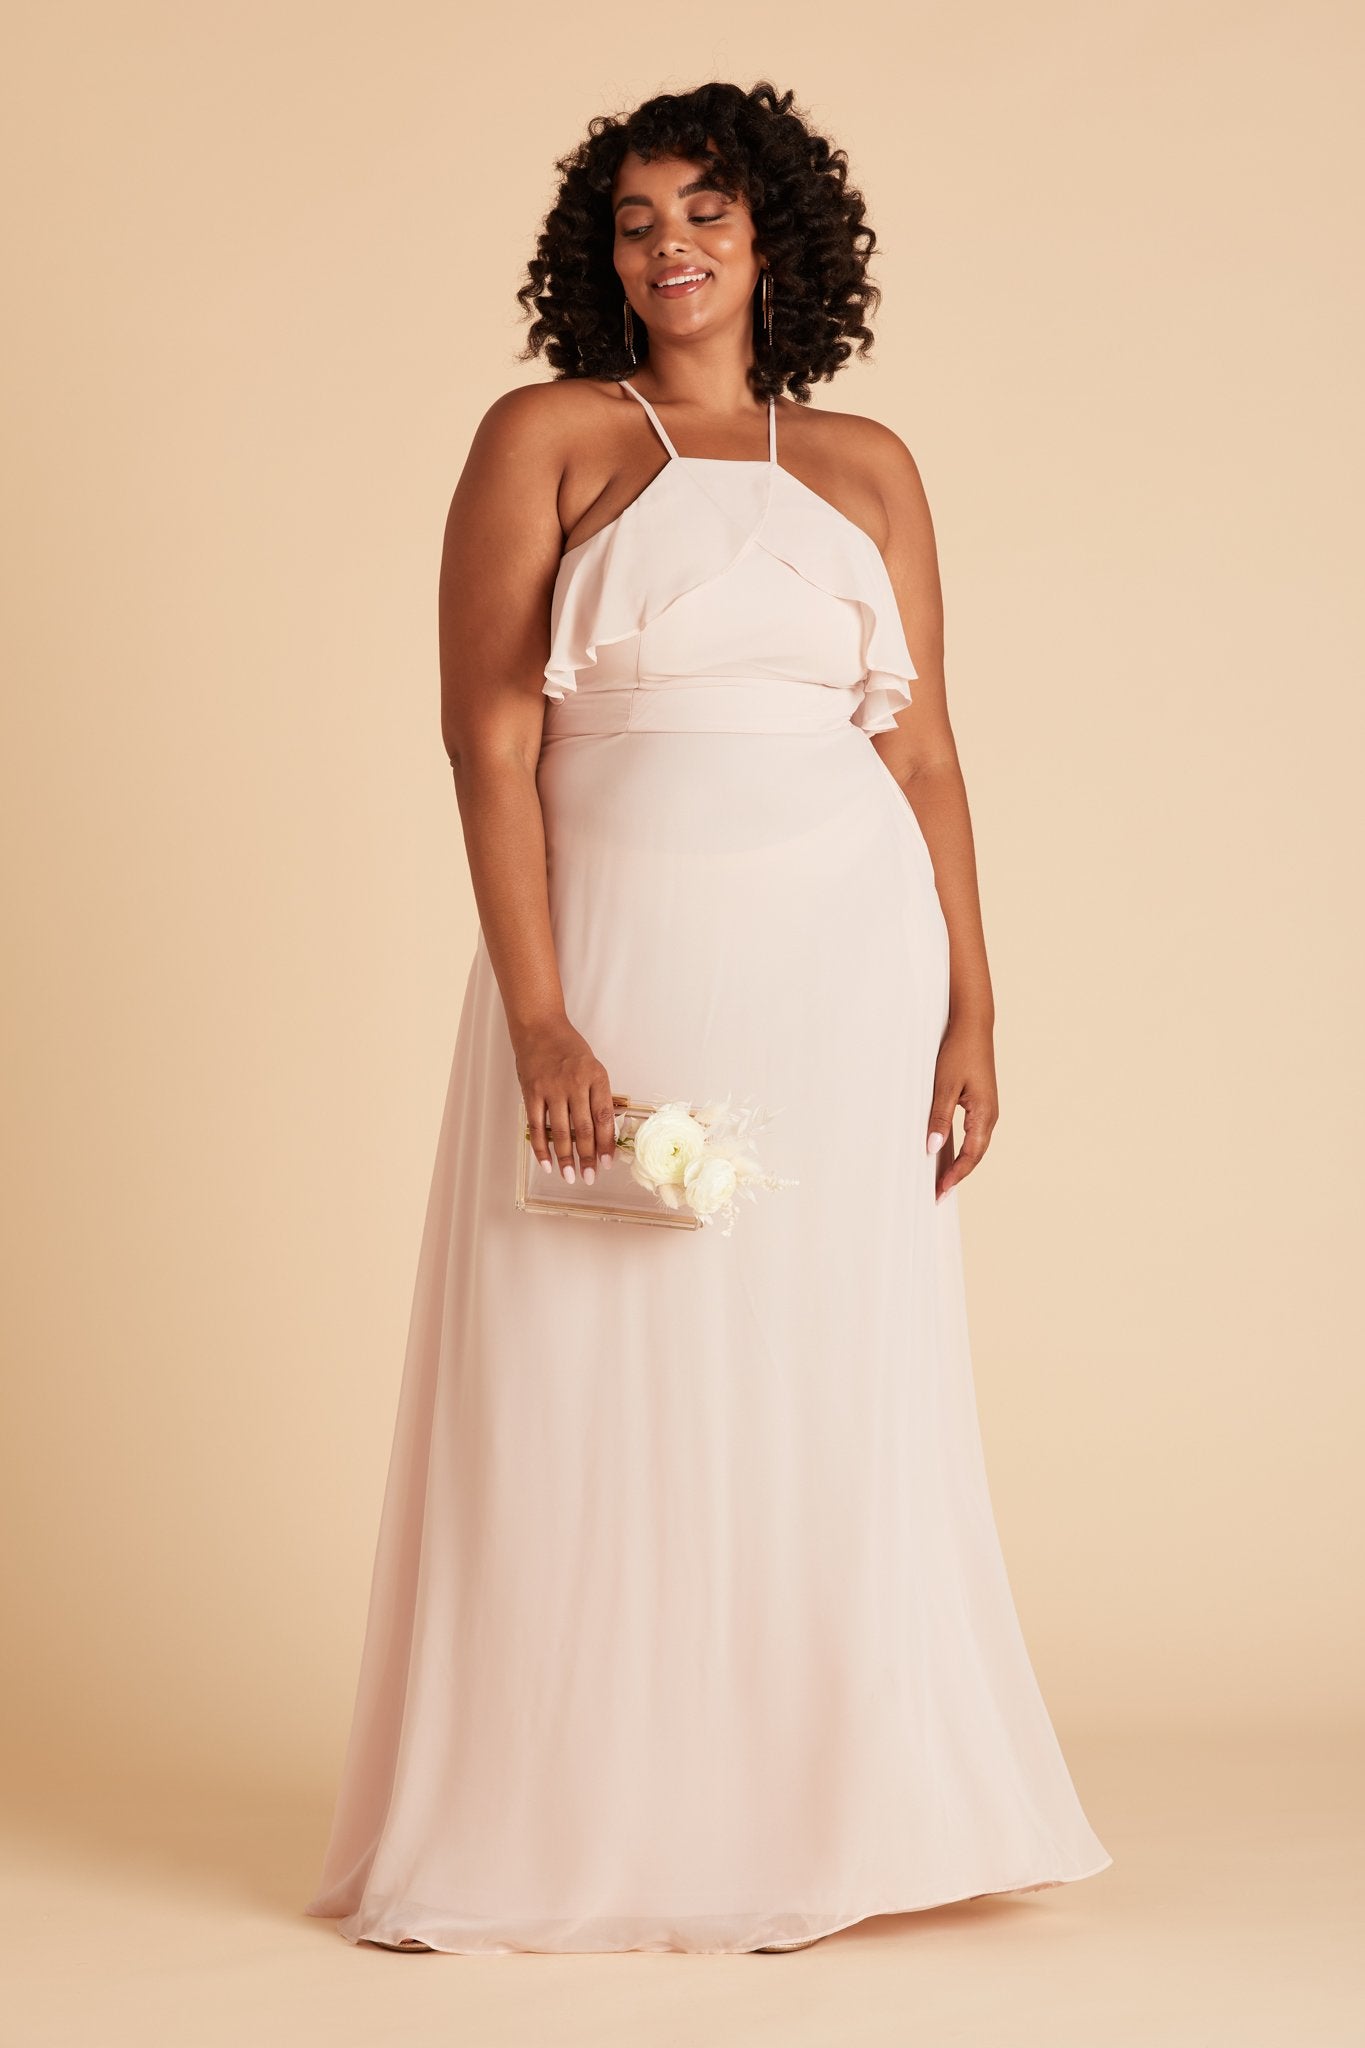 Jules plus size bridesmaid dress in pale blush chiffon by Birdy Grey, front view